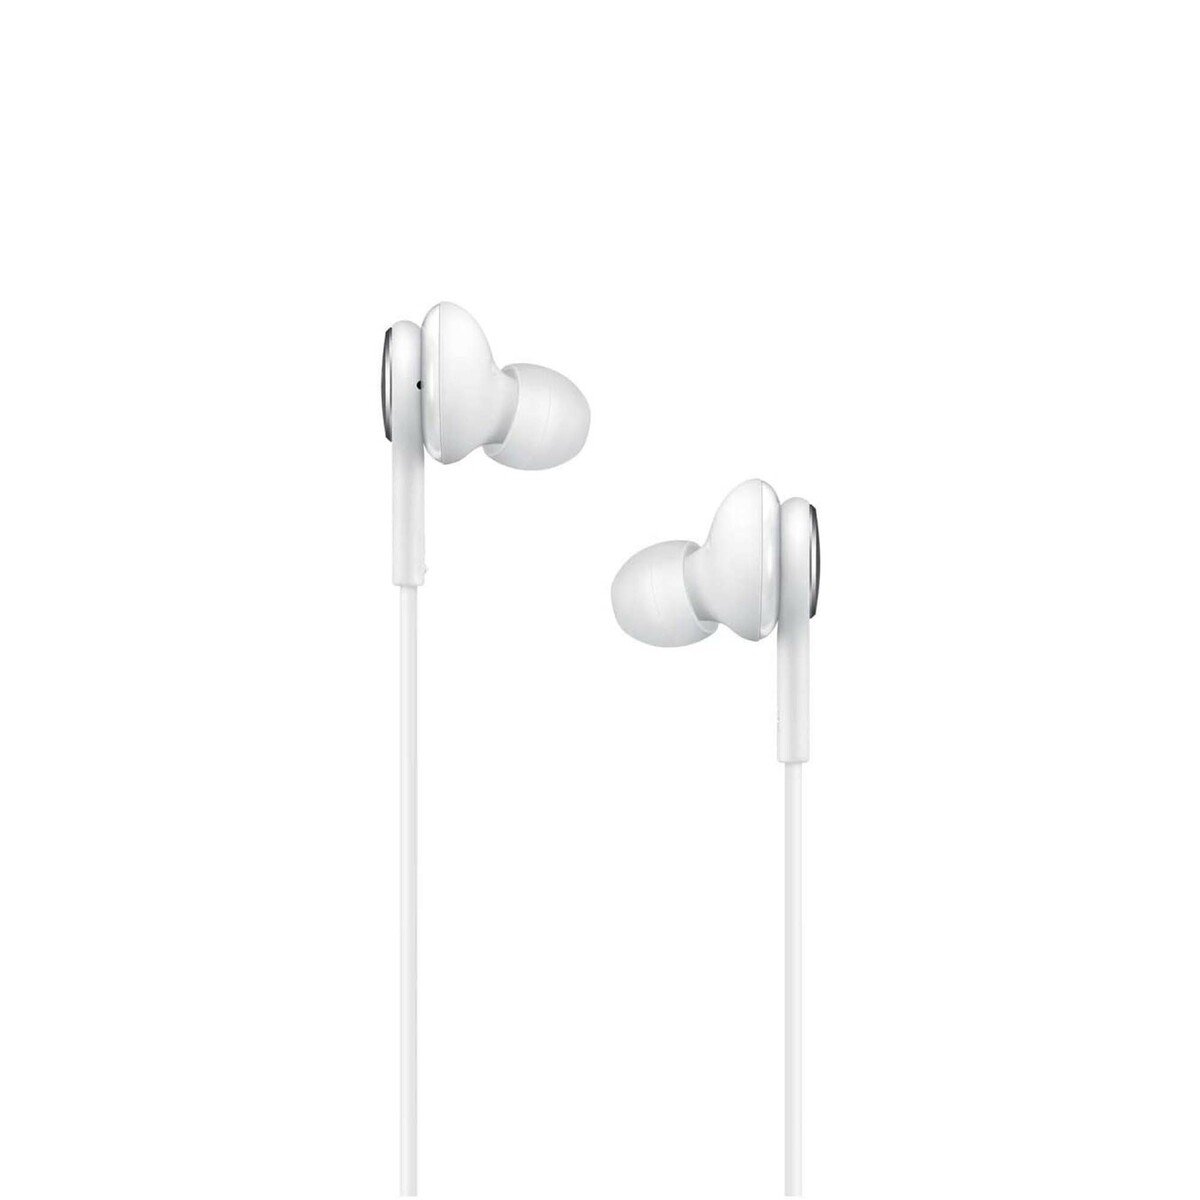 | Price | EO-IC100 Best Hands Stereo at In-Ear Lulu Samsung Earphones Type-C Online (White) Mobile Kuwait Free